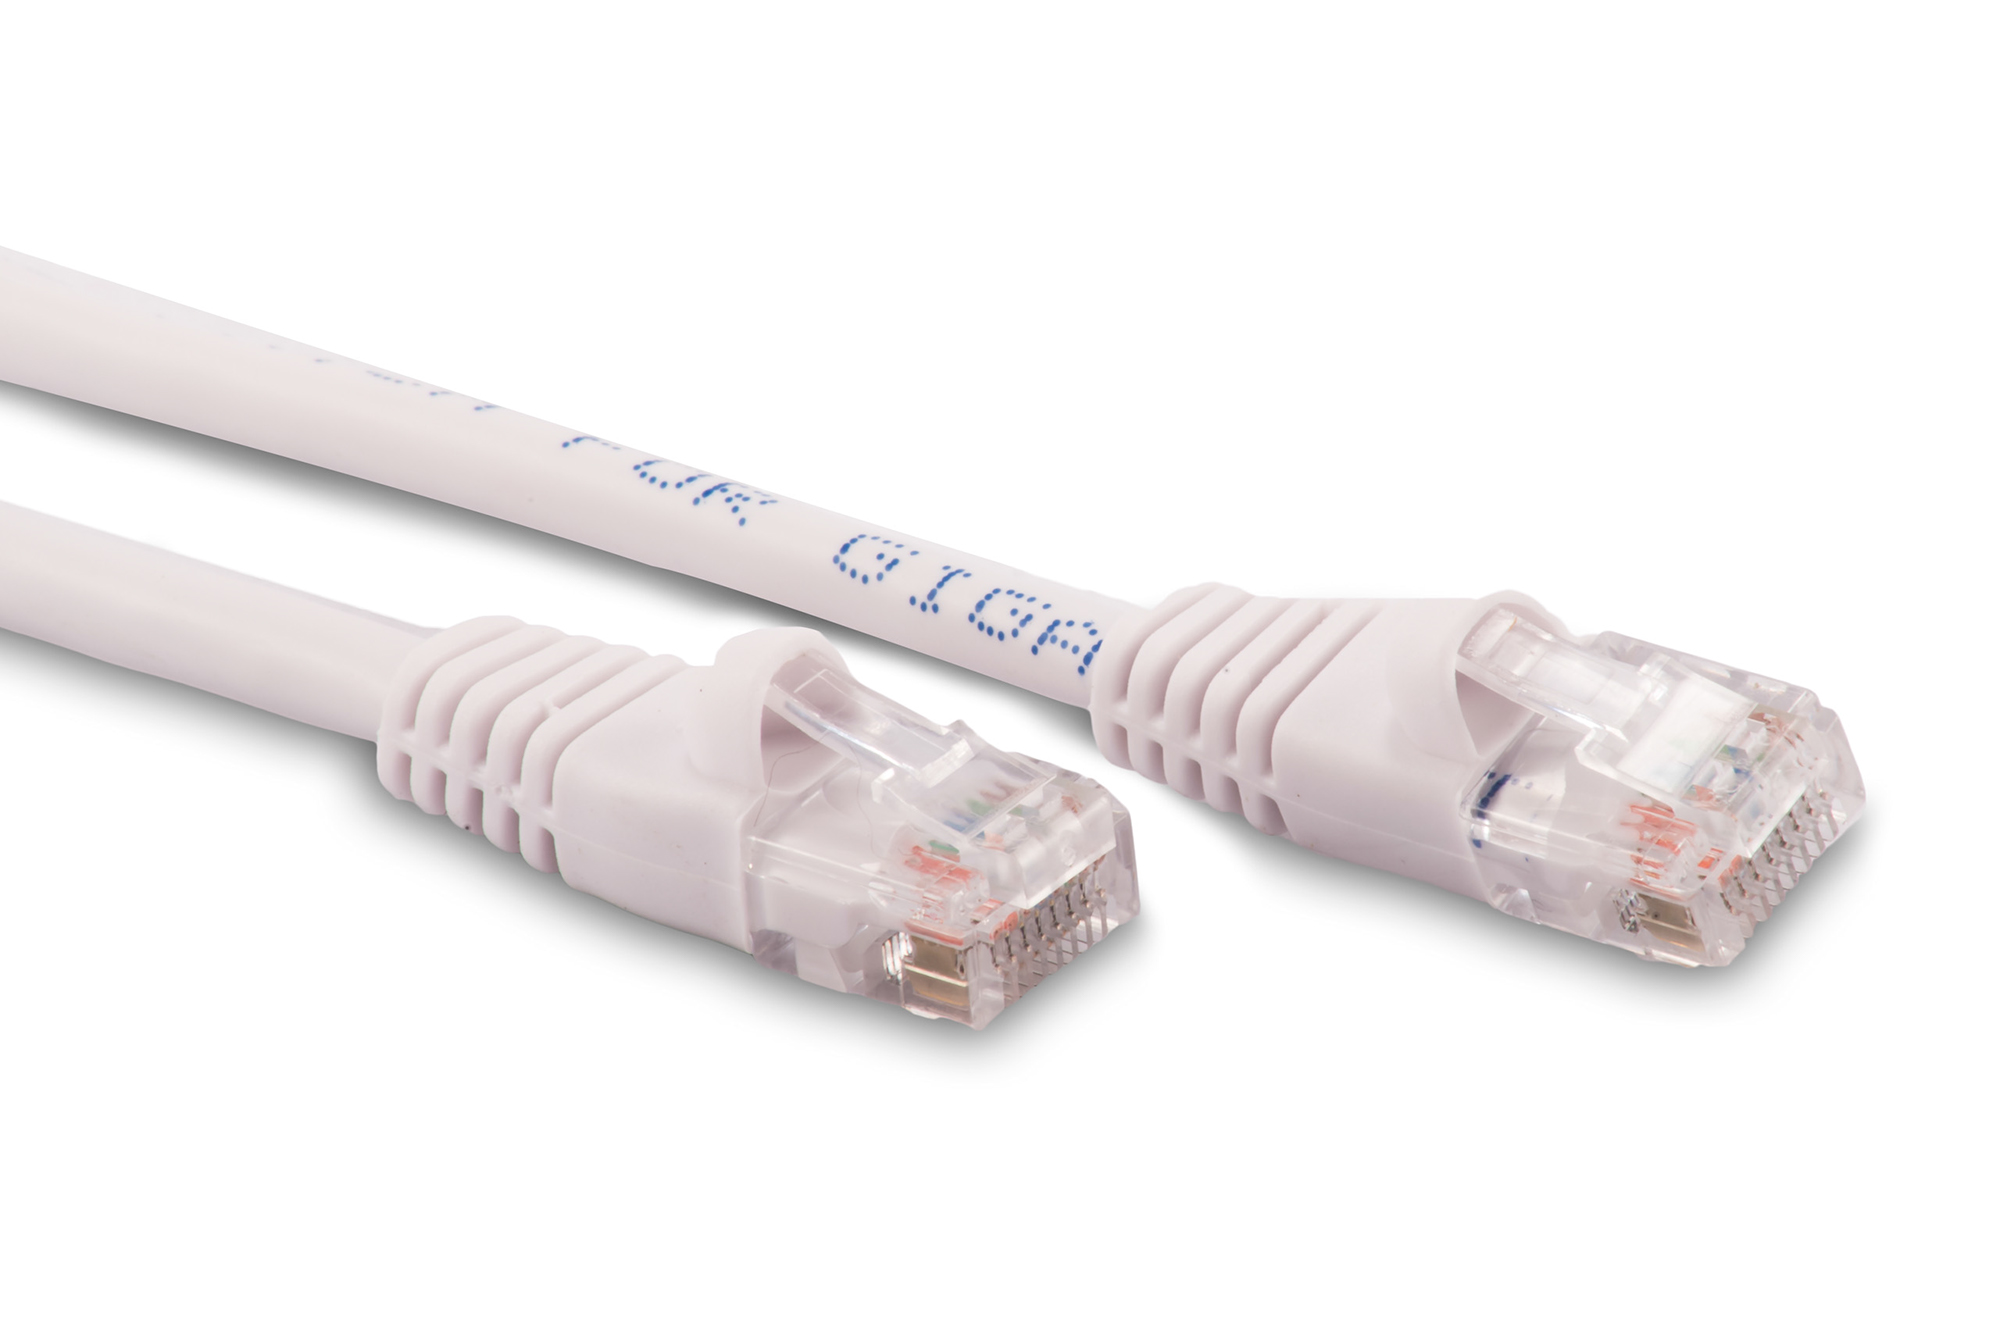 40ft Cat5e Ethernet Patch Cable - White Color - Snagless Boot